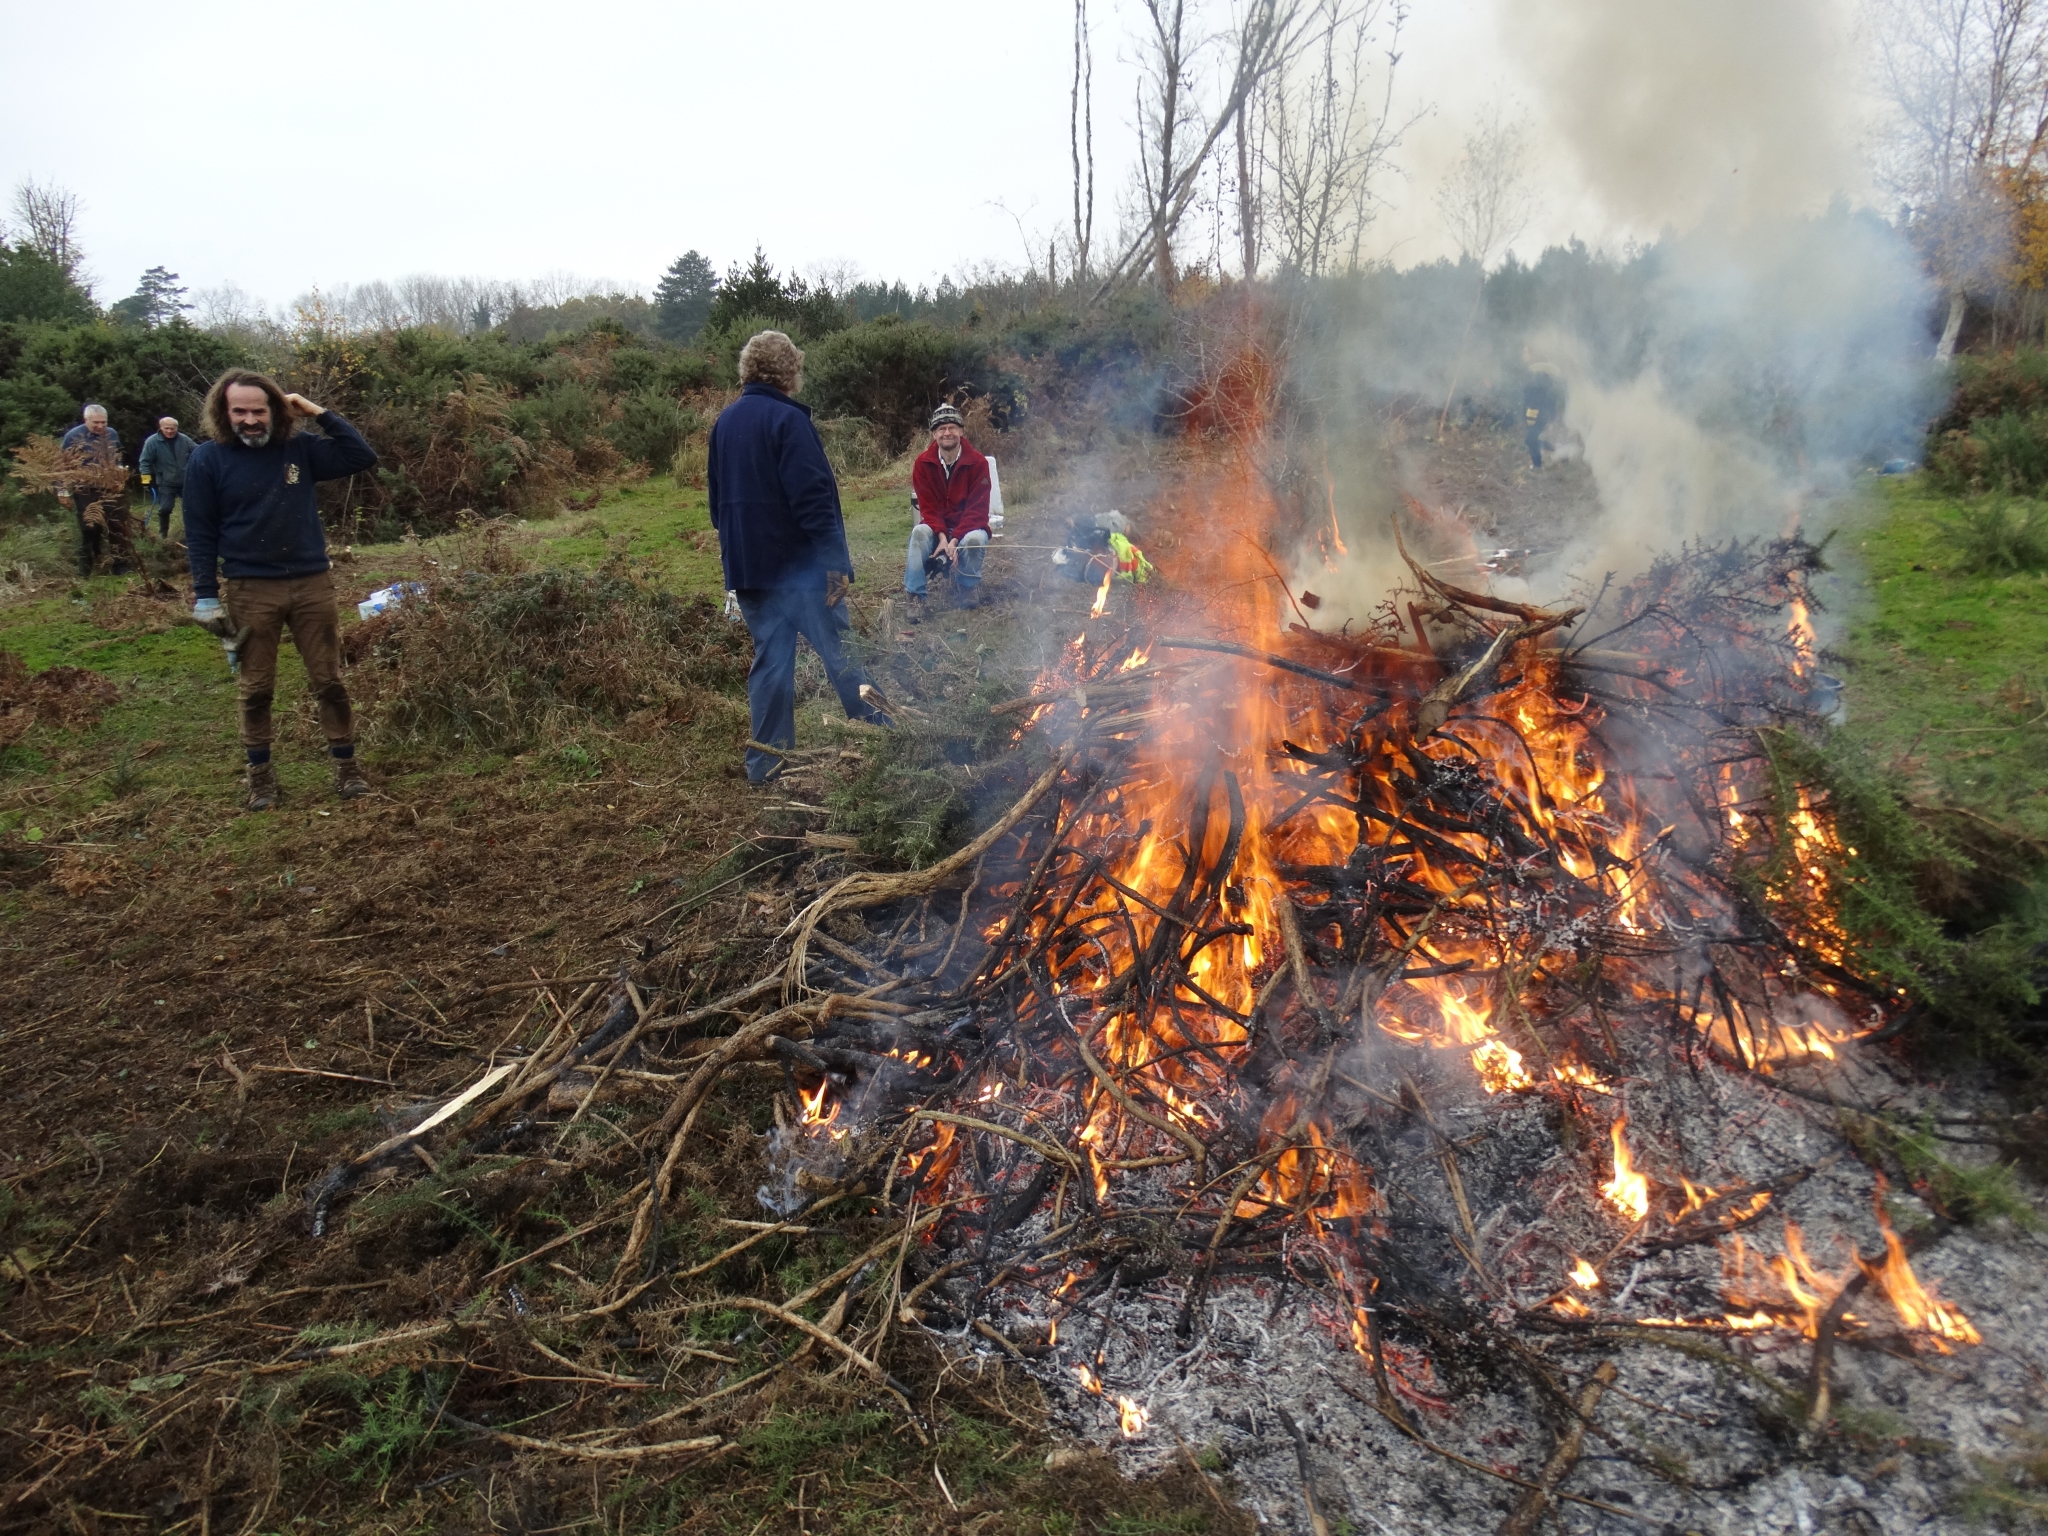 A photo from the FoTF Conservation Event - November 2019 - Gorse Clearance at Hockham Hills & Holes : Gorse burns on the fire